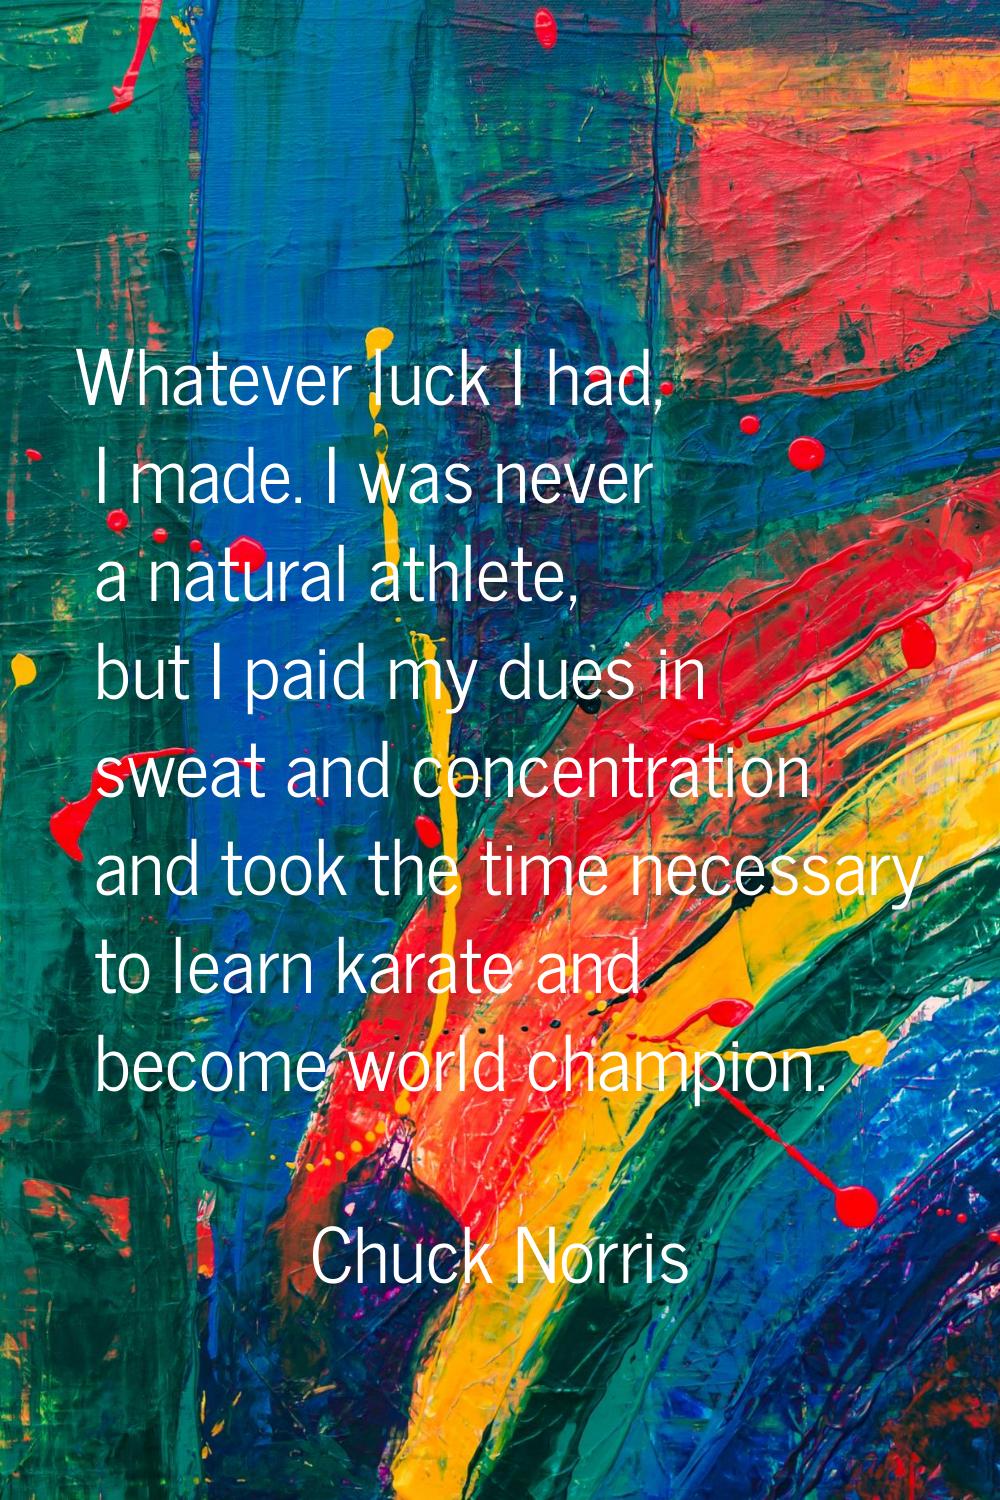 Whatever luck I had, I made. I was never a natural athlete, but I paid my dues in sweat and concent